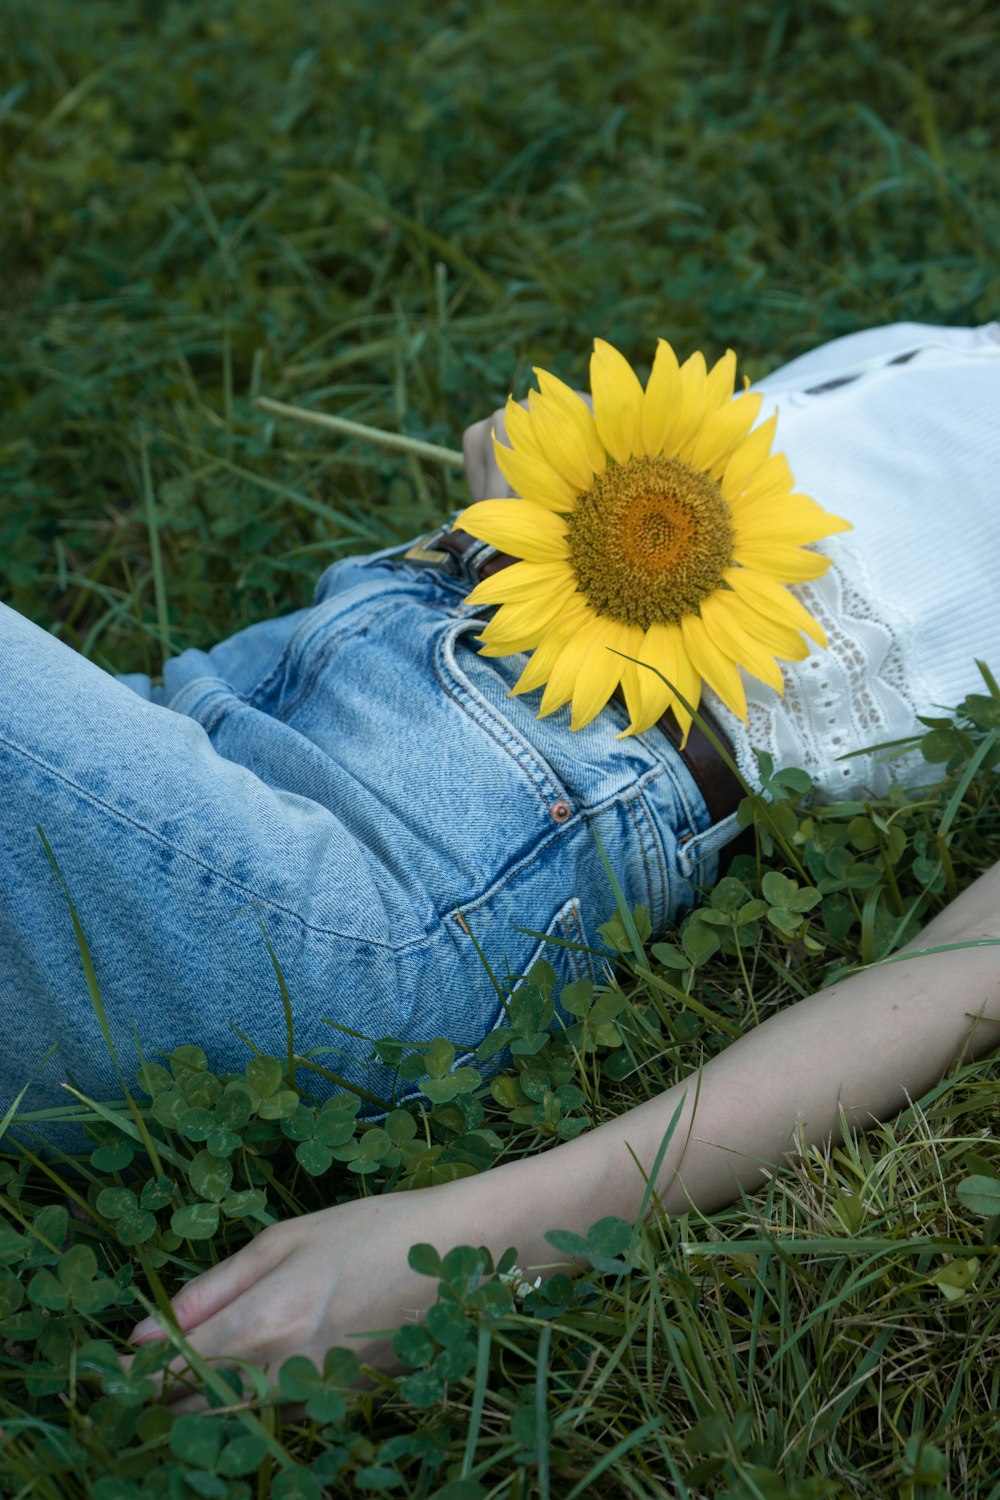 person in blue denim jeans sitting on white textile with yellow sunflower on her lap